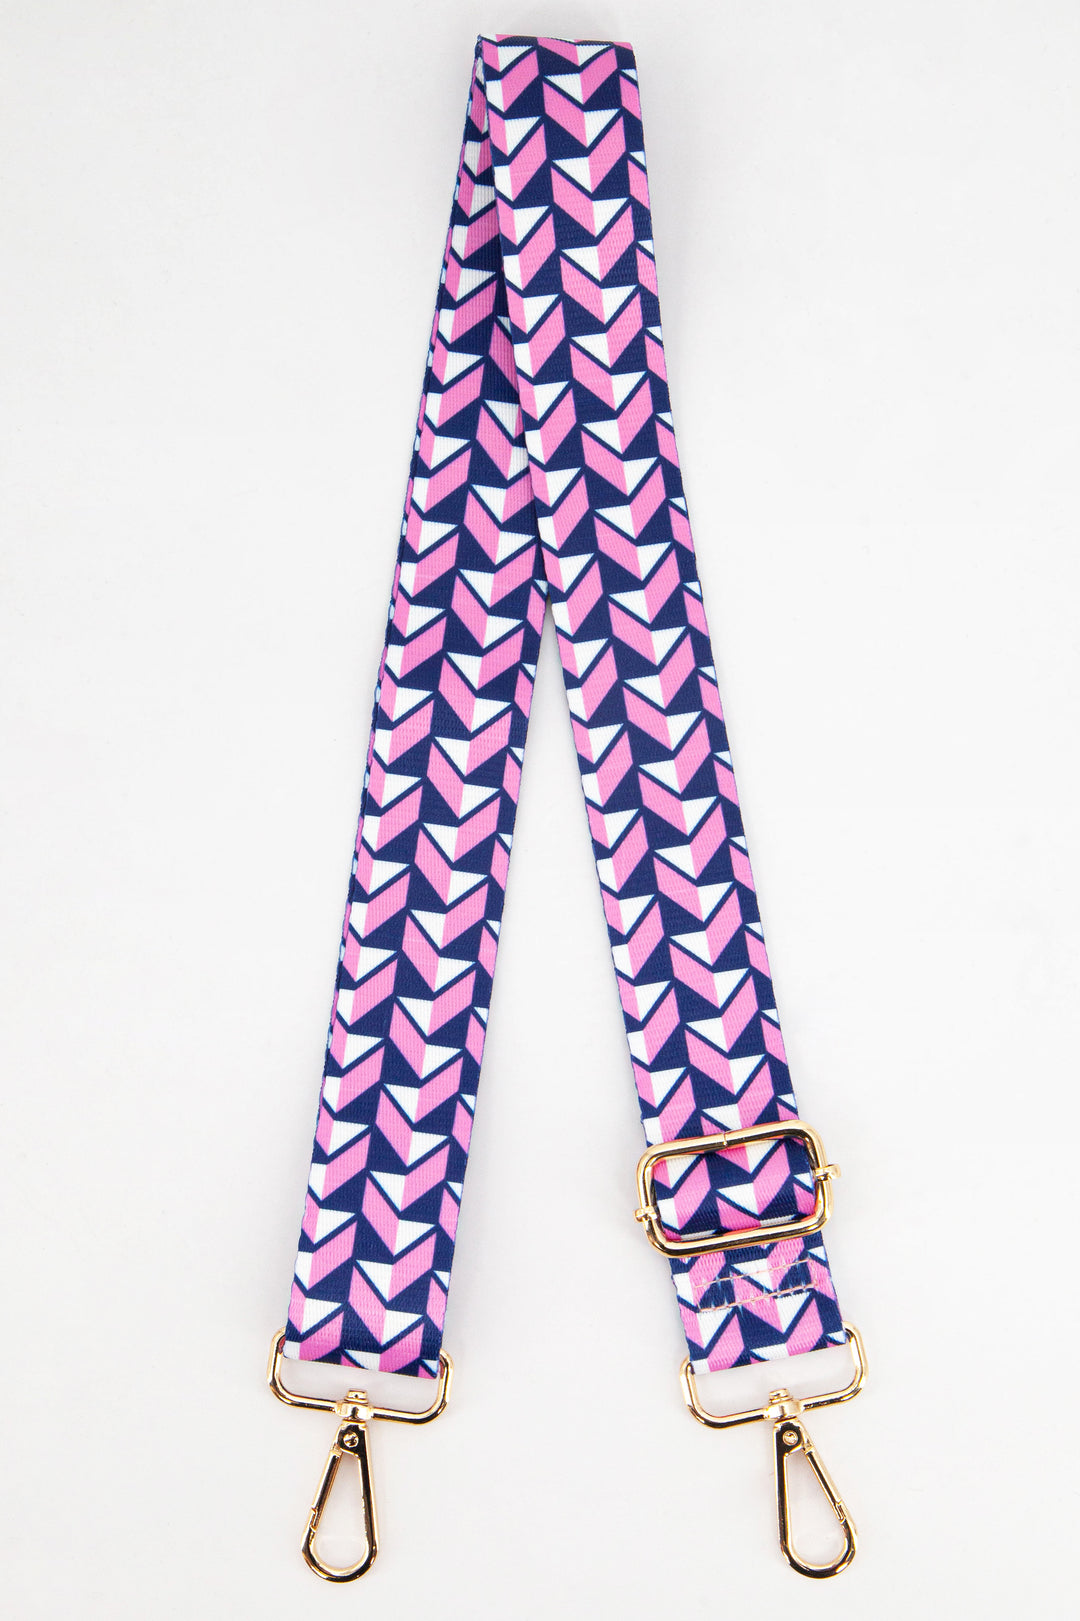 pink and navy blue three dimensional chevron pattern bag strap with gold snap hook attachments